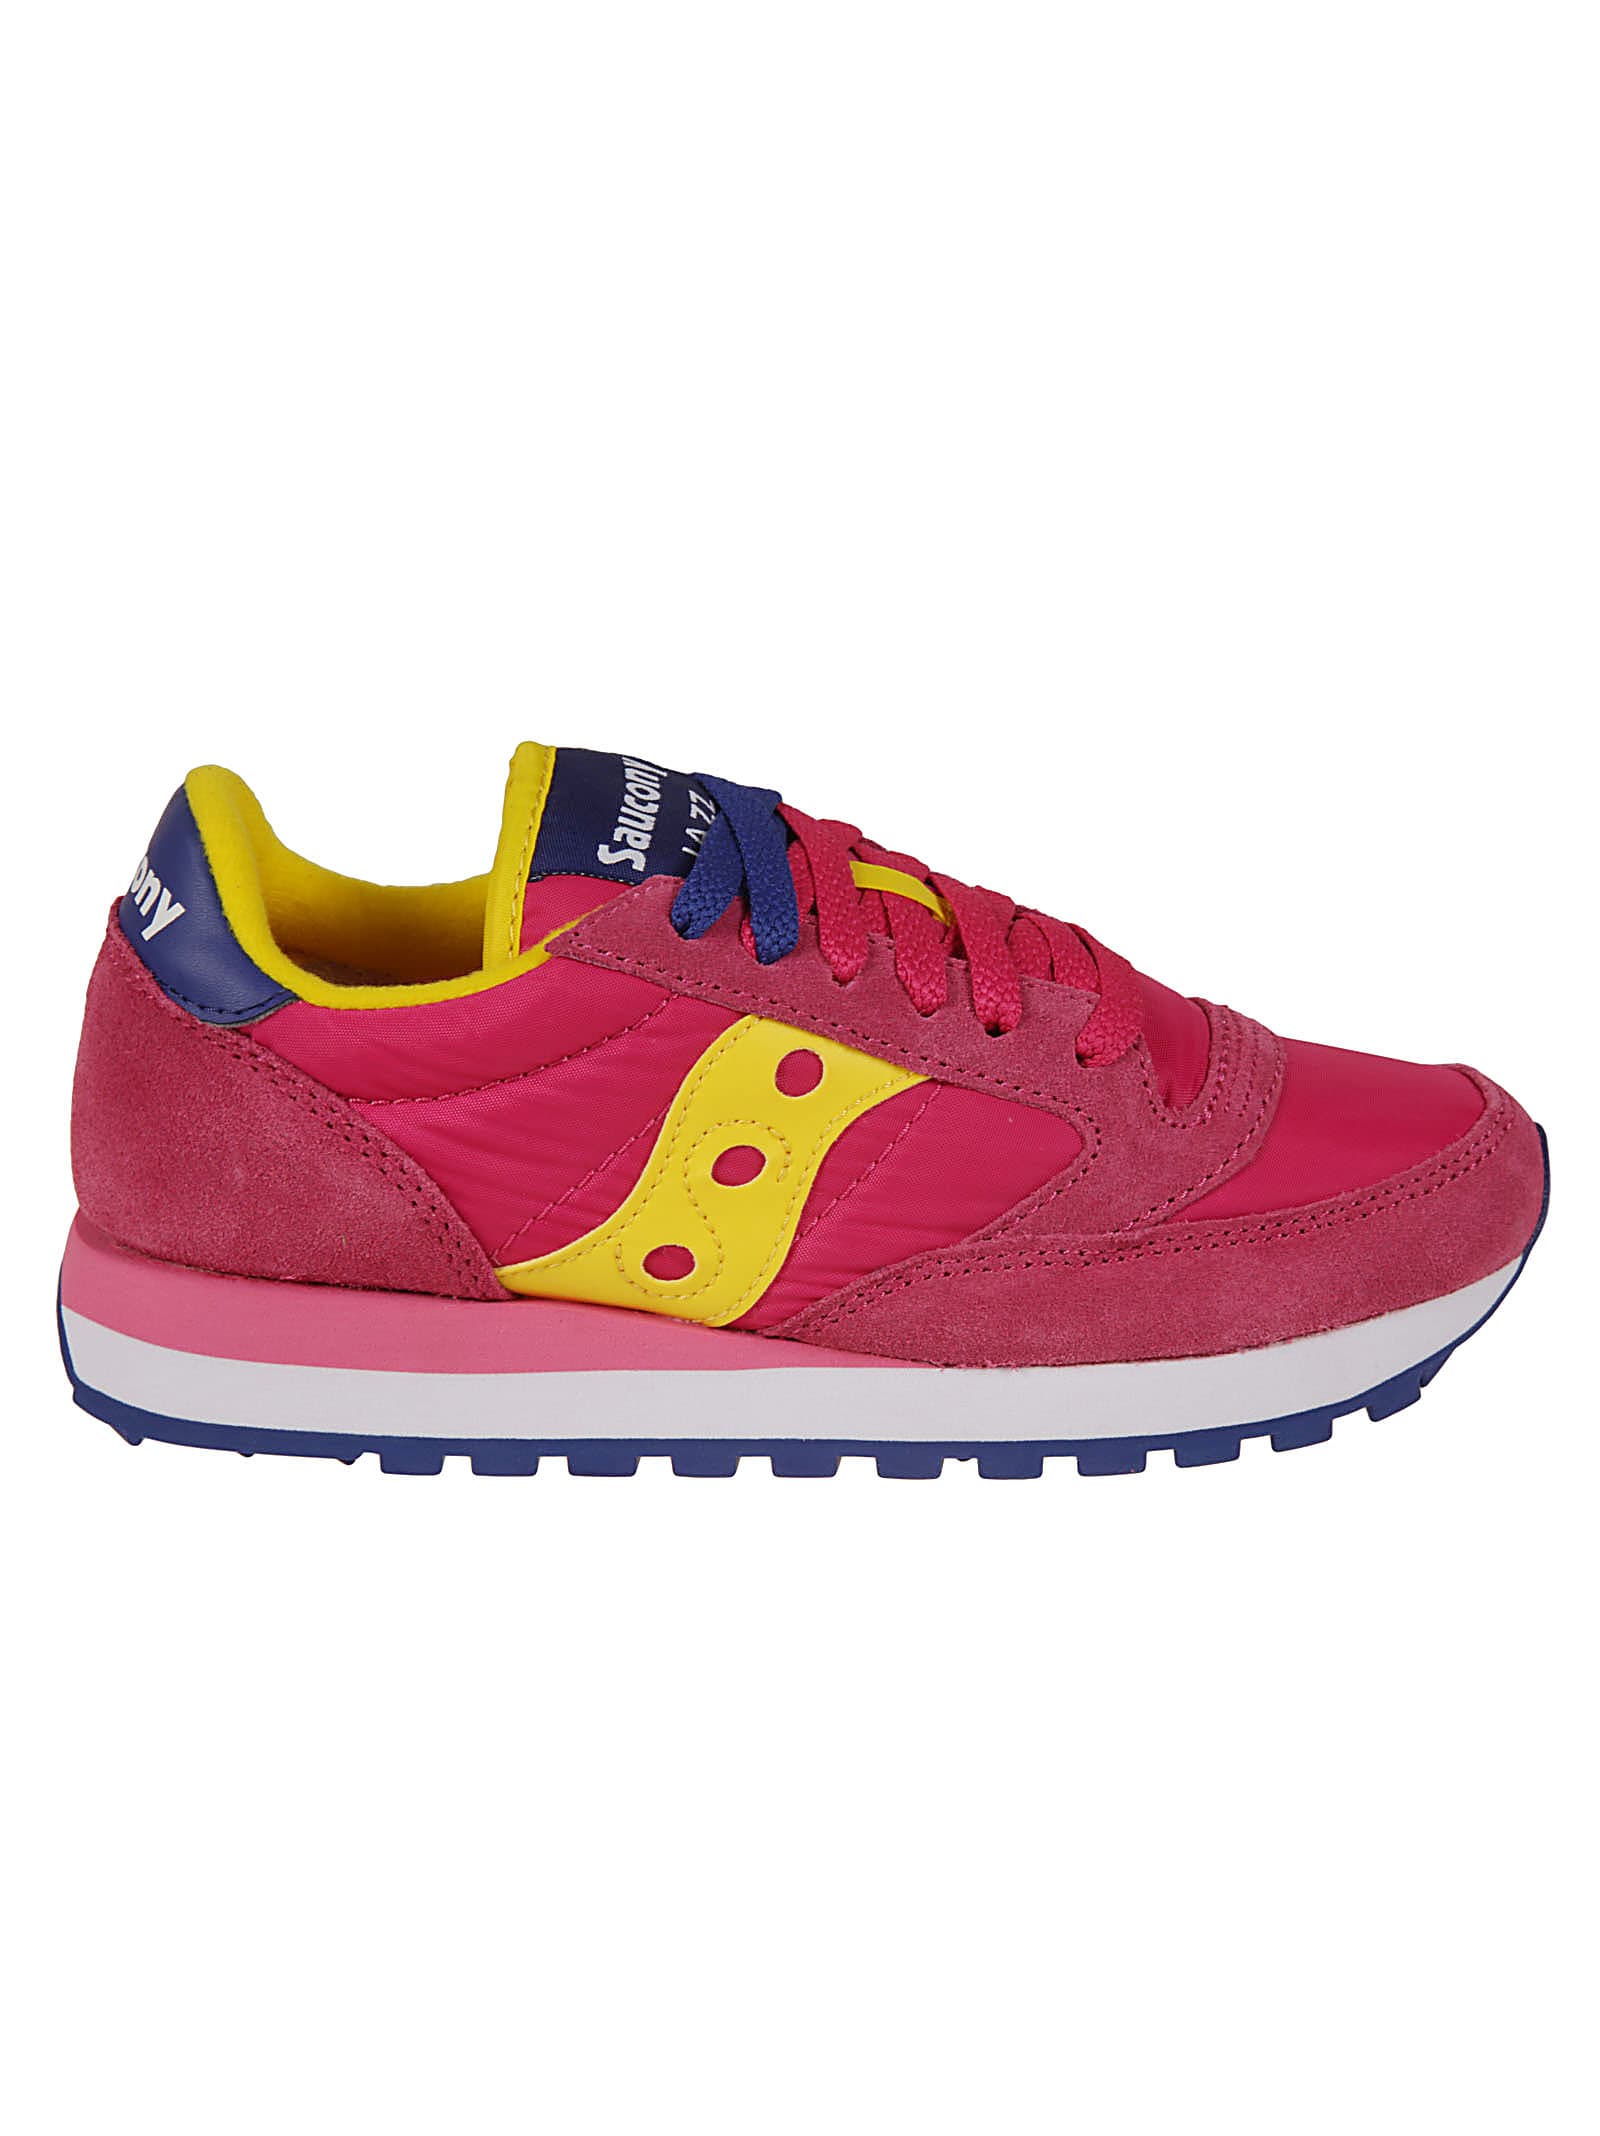 pink and yellow sneakers